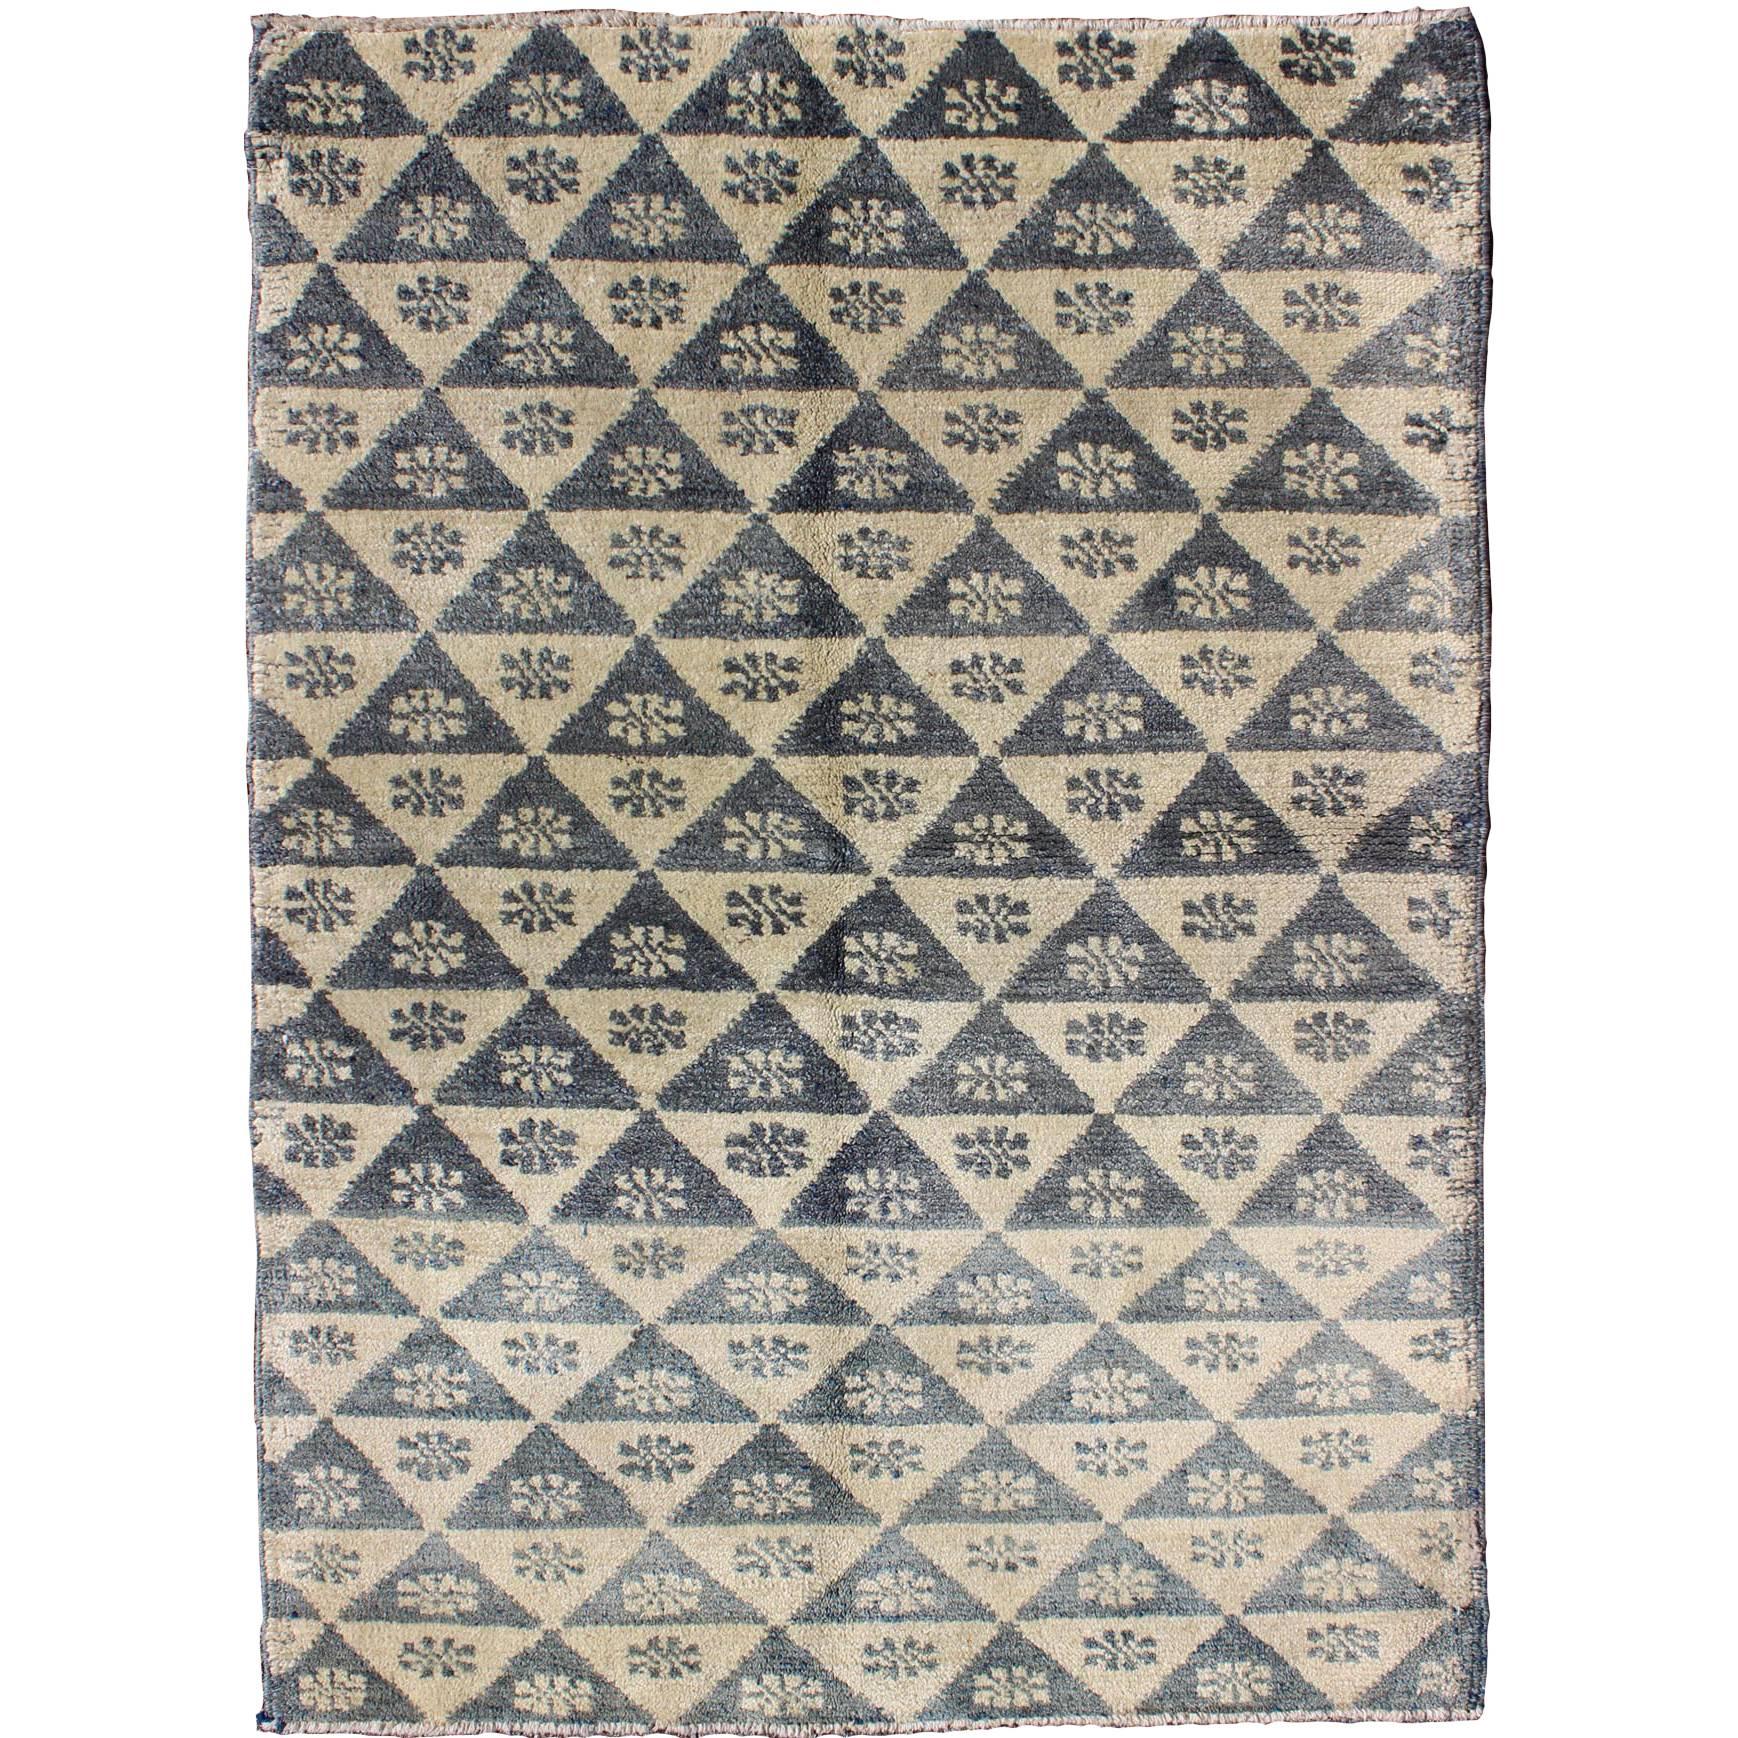 All-Over Turkish Tulu Rug with Blue and Ivory Triangle / Flower Design